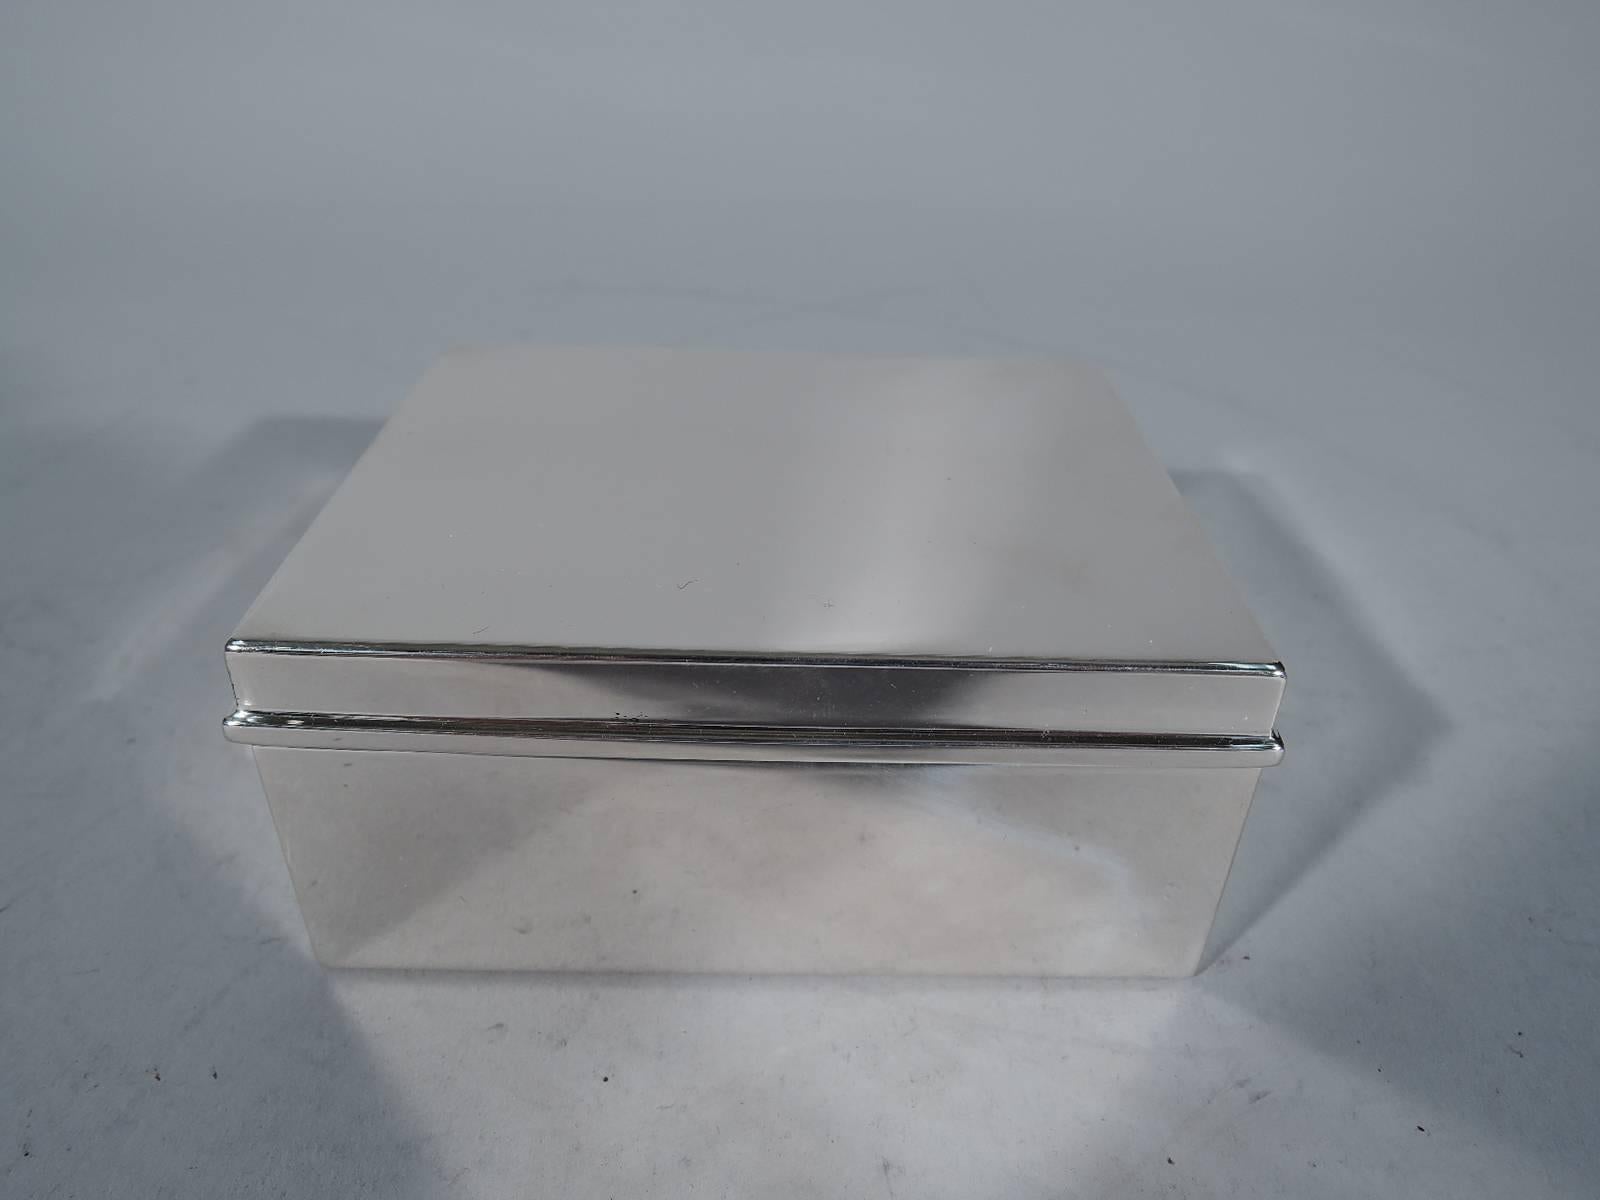 Modern sterling silver box. Made by Tiffany & Co. in New York. Rectangular with straight sides. Cover hinged and flat with molded rim. Box interior cedar-lined. Cover interior gilt. Hallmark includes pattern no. 22355 and director’s letter M